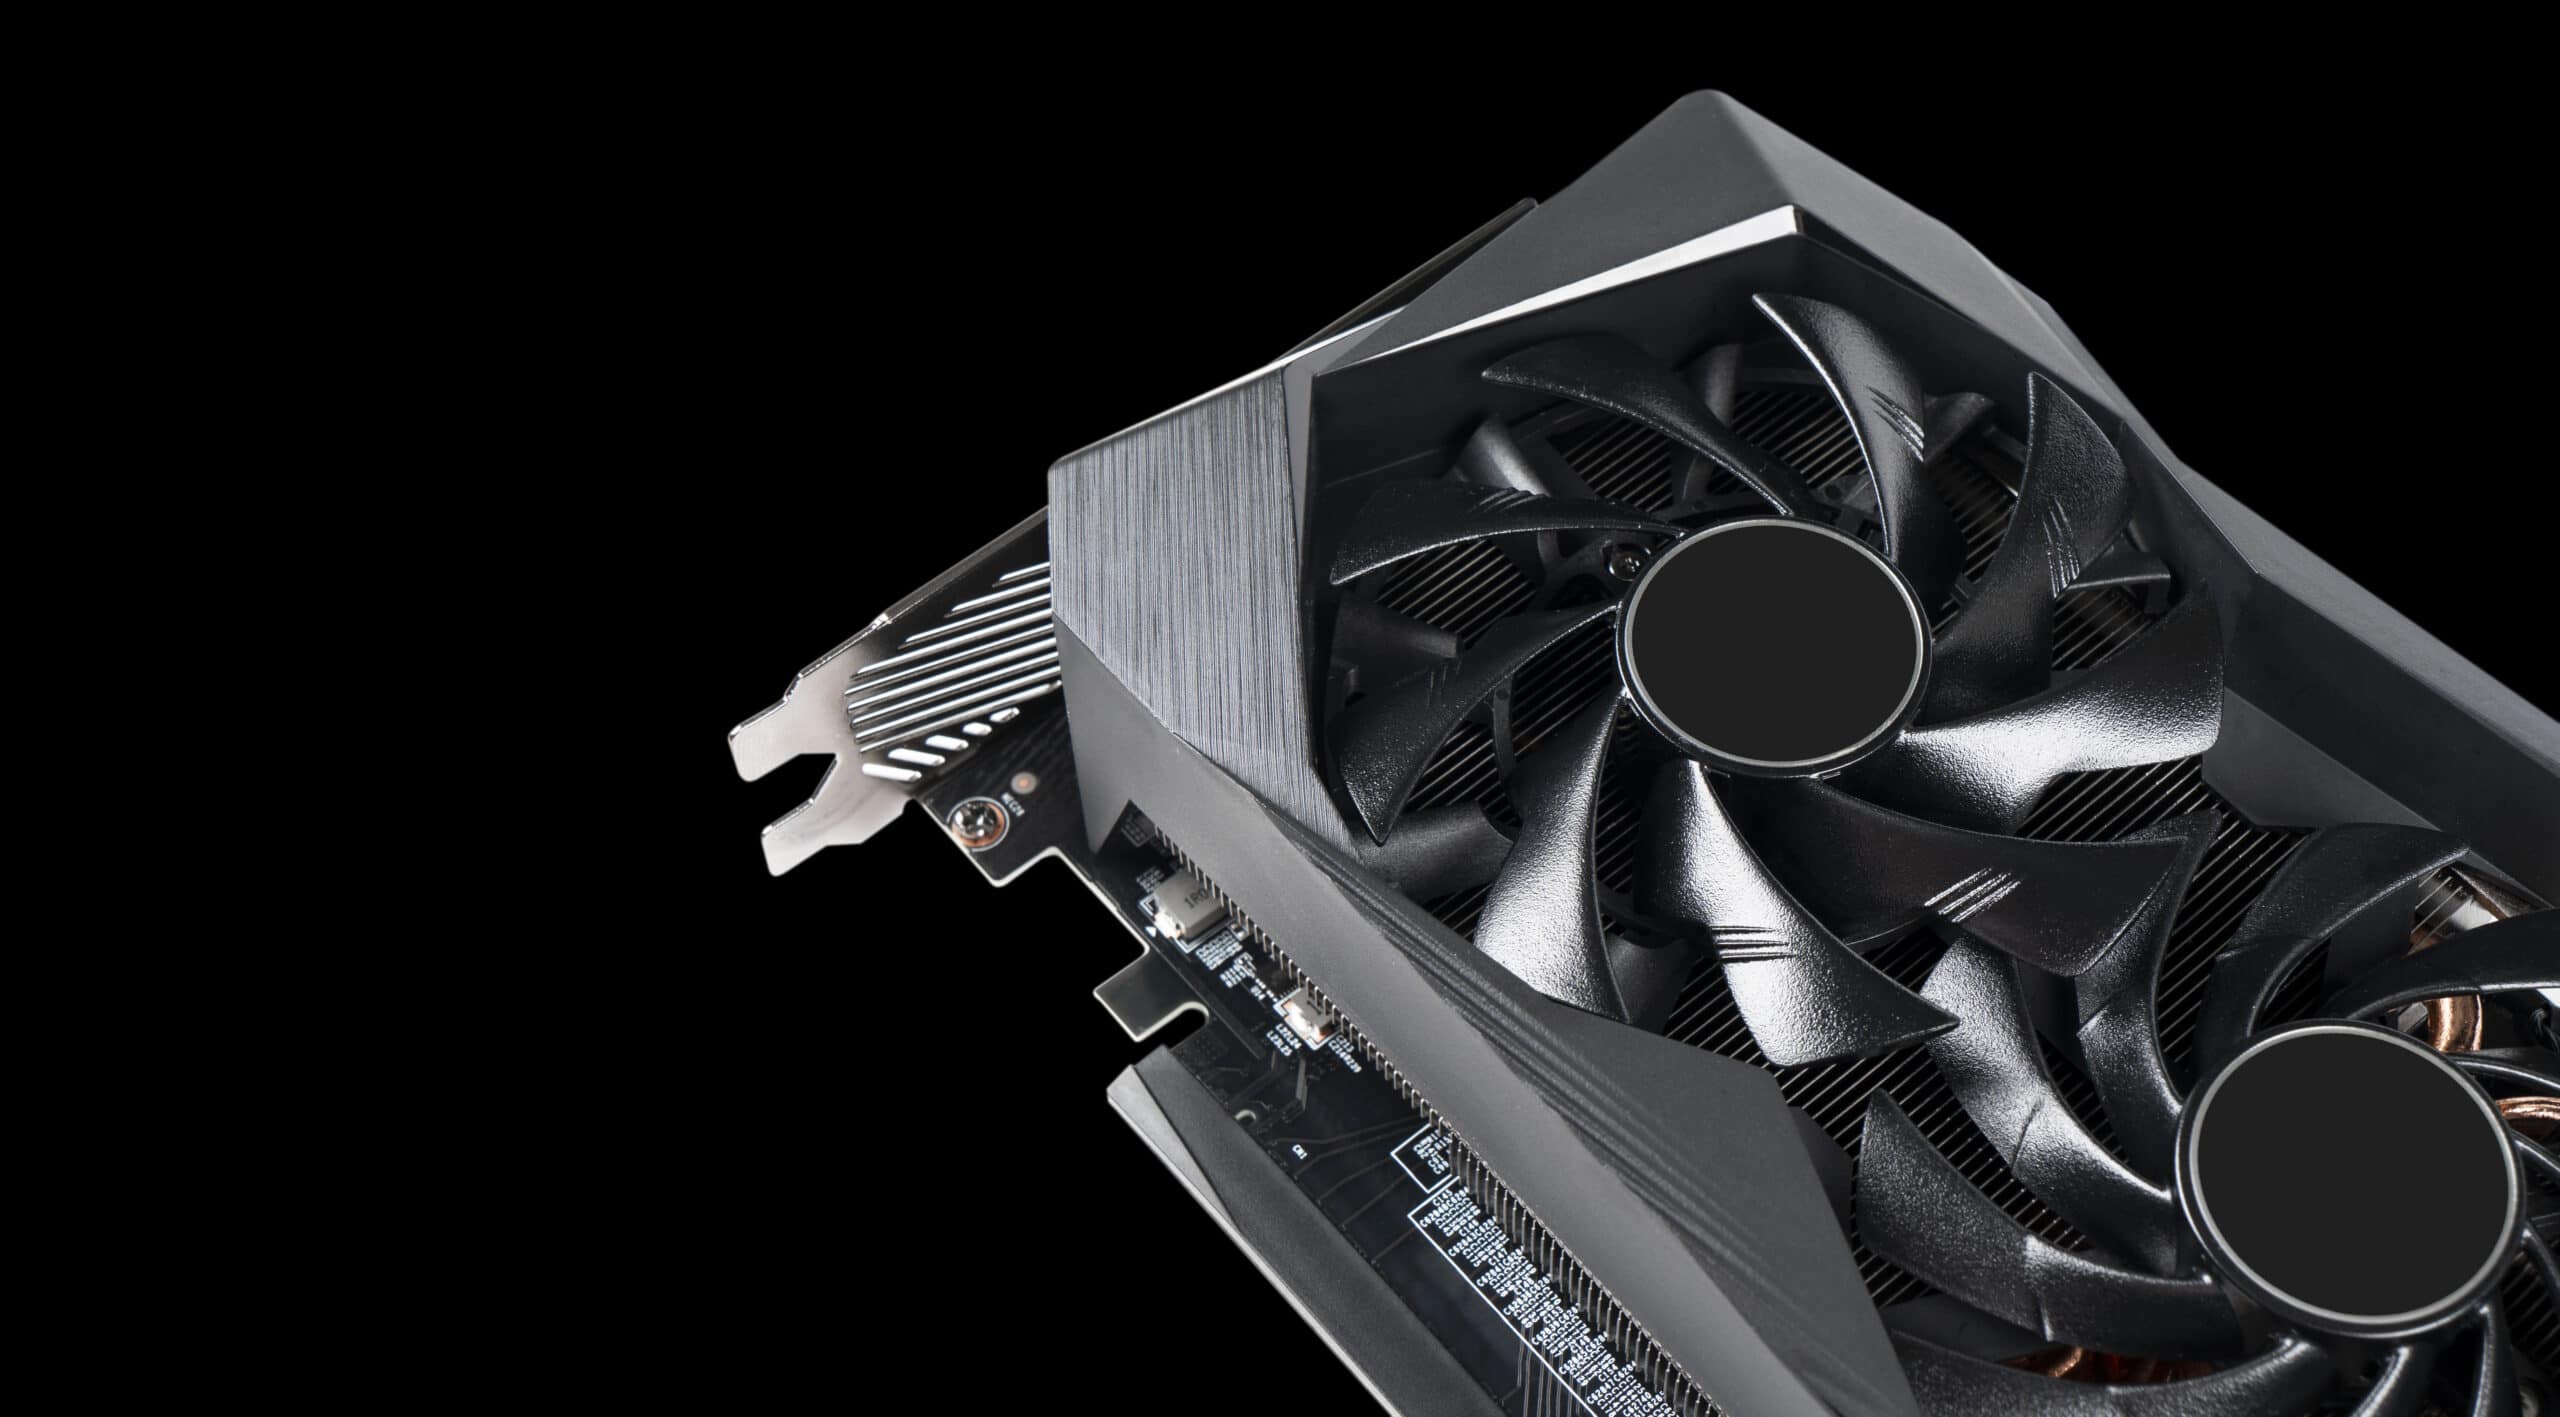 Video card with fan. Gaming graphics card for video games and cryptocurrency mining. Game video card isolated on black background. Electronic device, computer part. GPU card